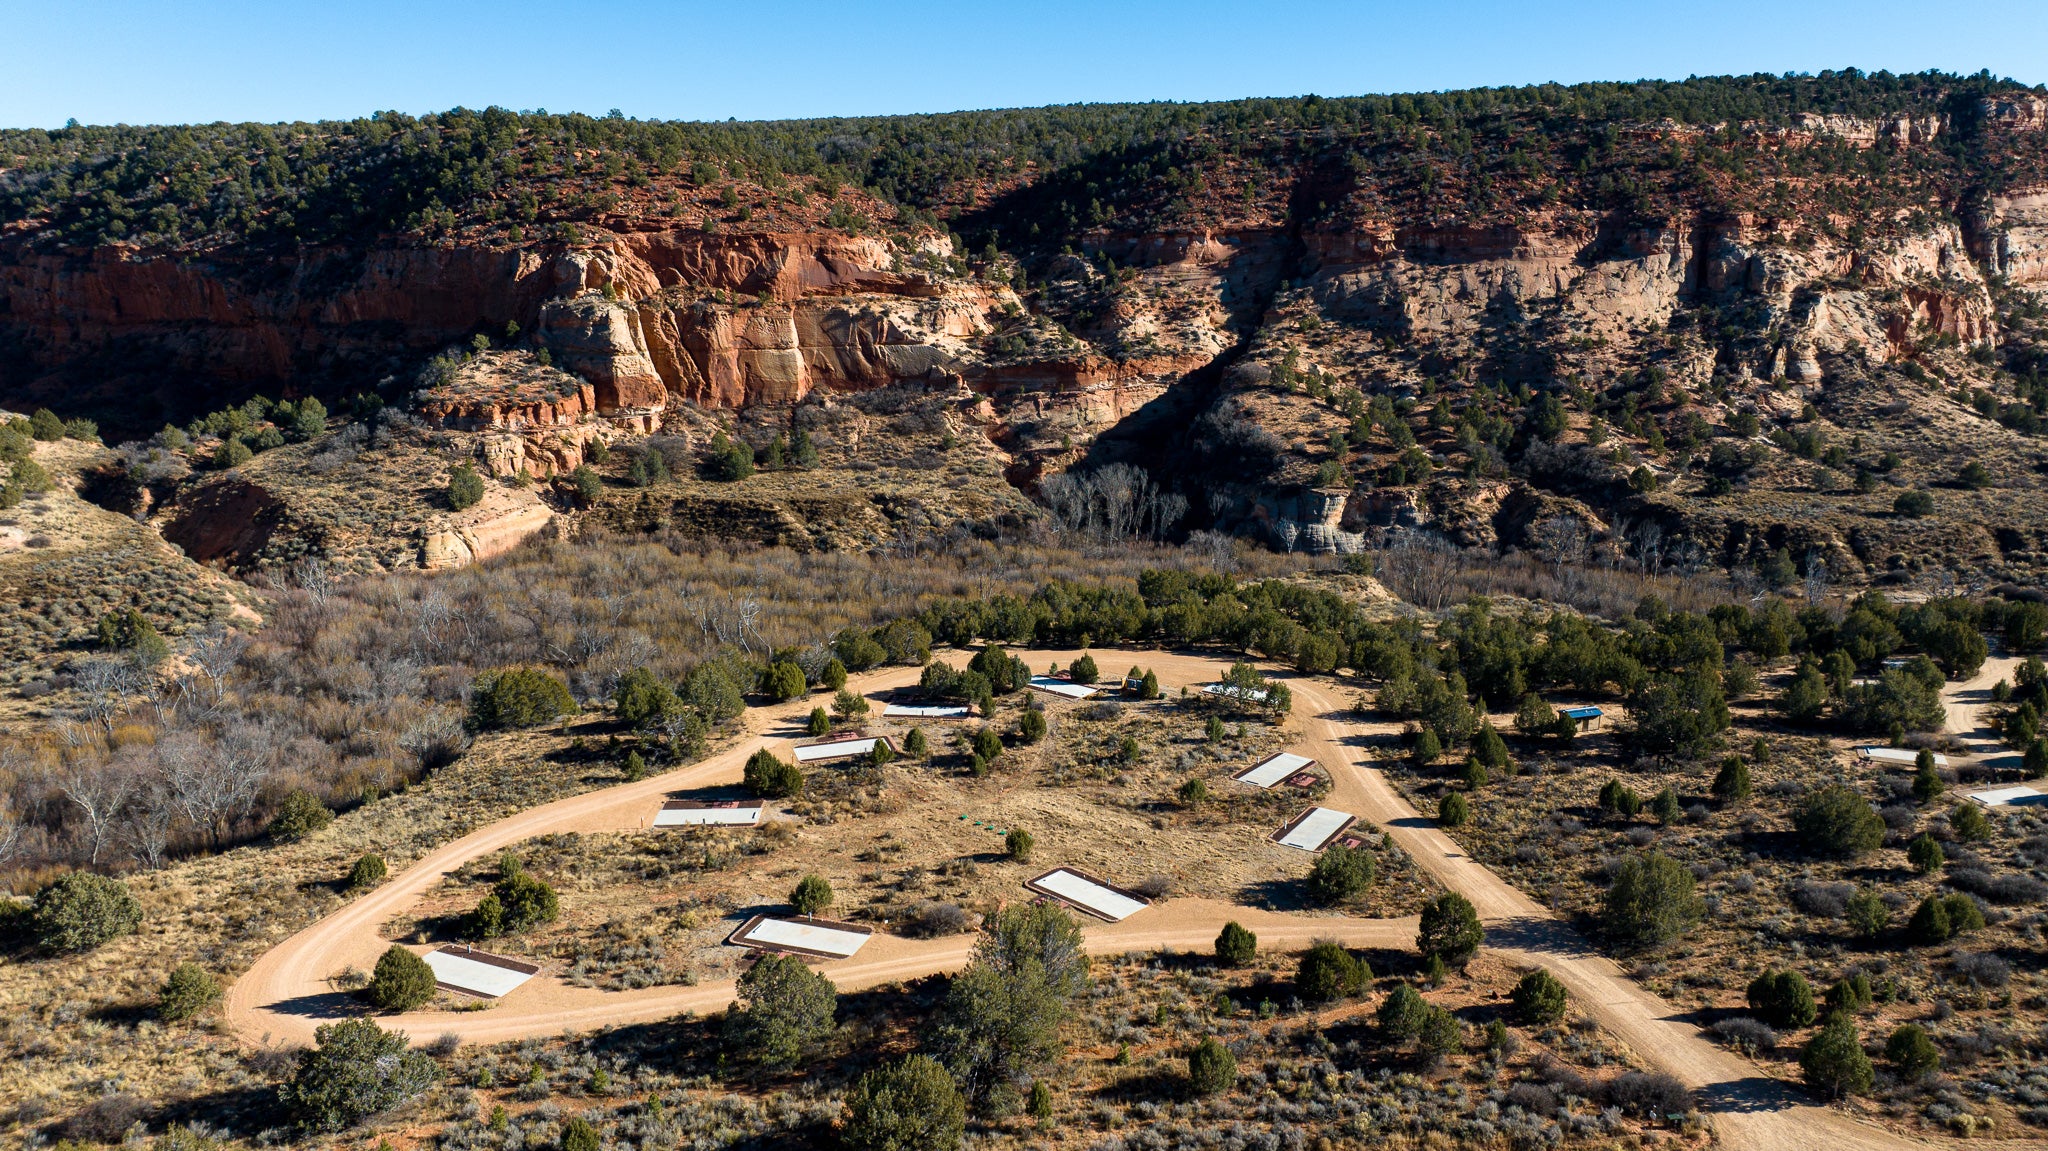 Overhead view of the RV sites at Best Friends Animal Sanctuary with cliffs in the background